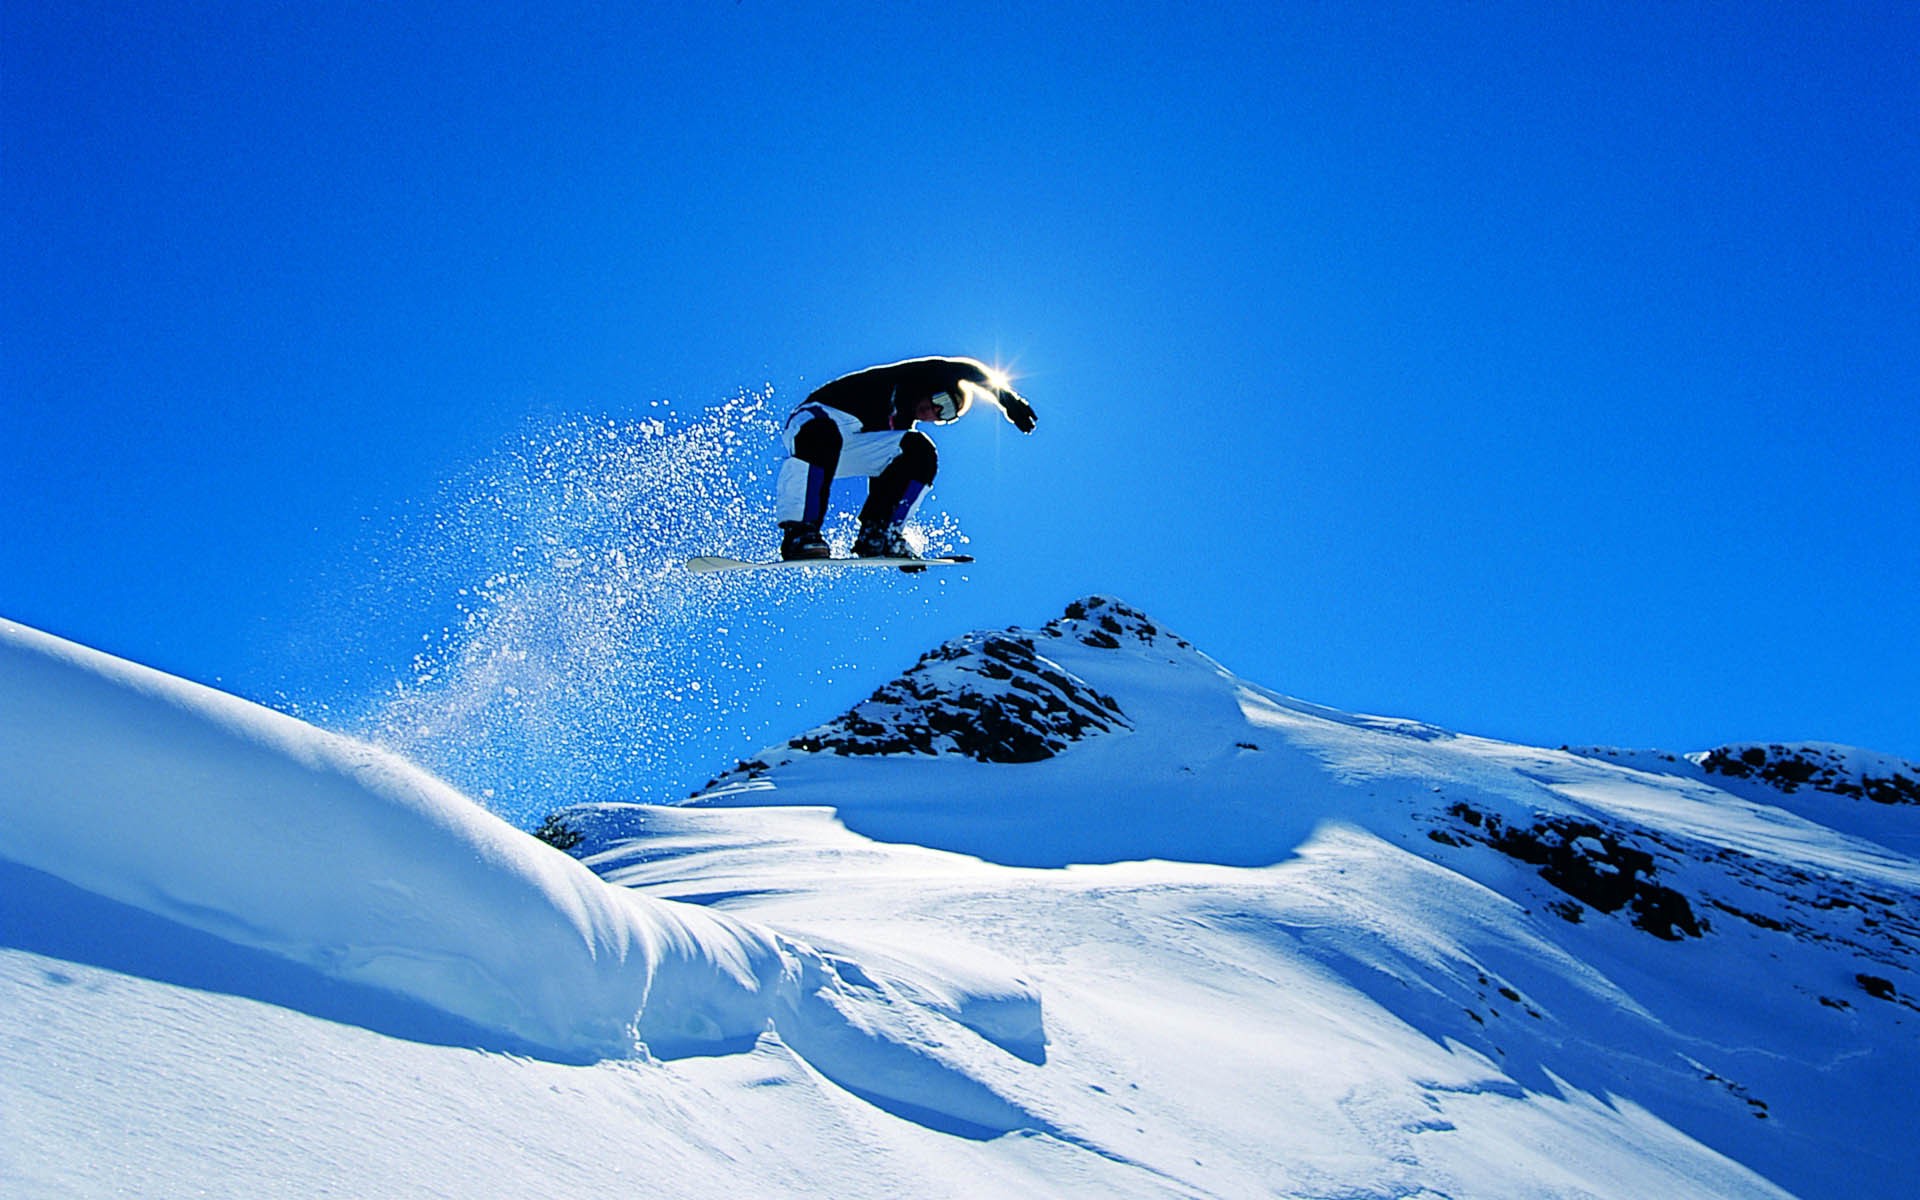 High Resolution Snowboard Wallpaper Pictures In